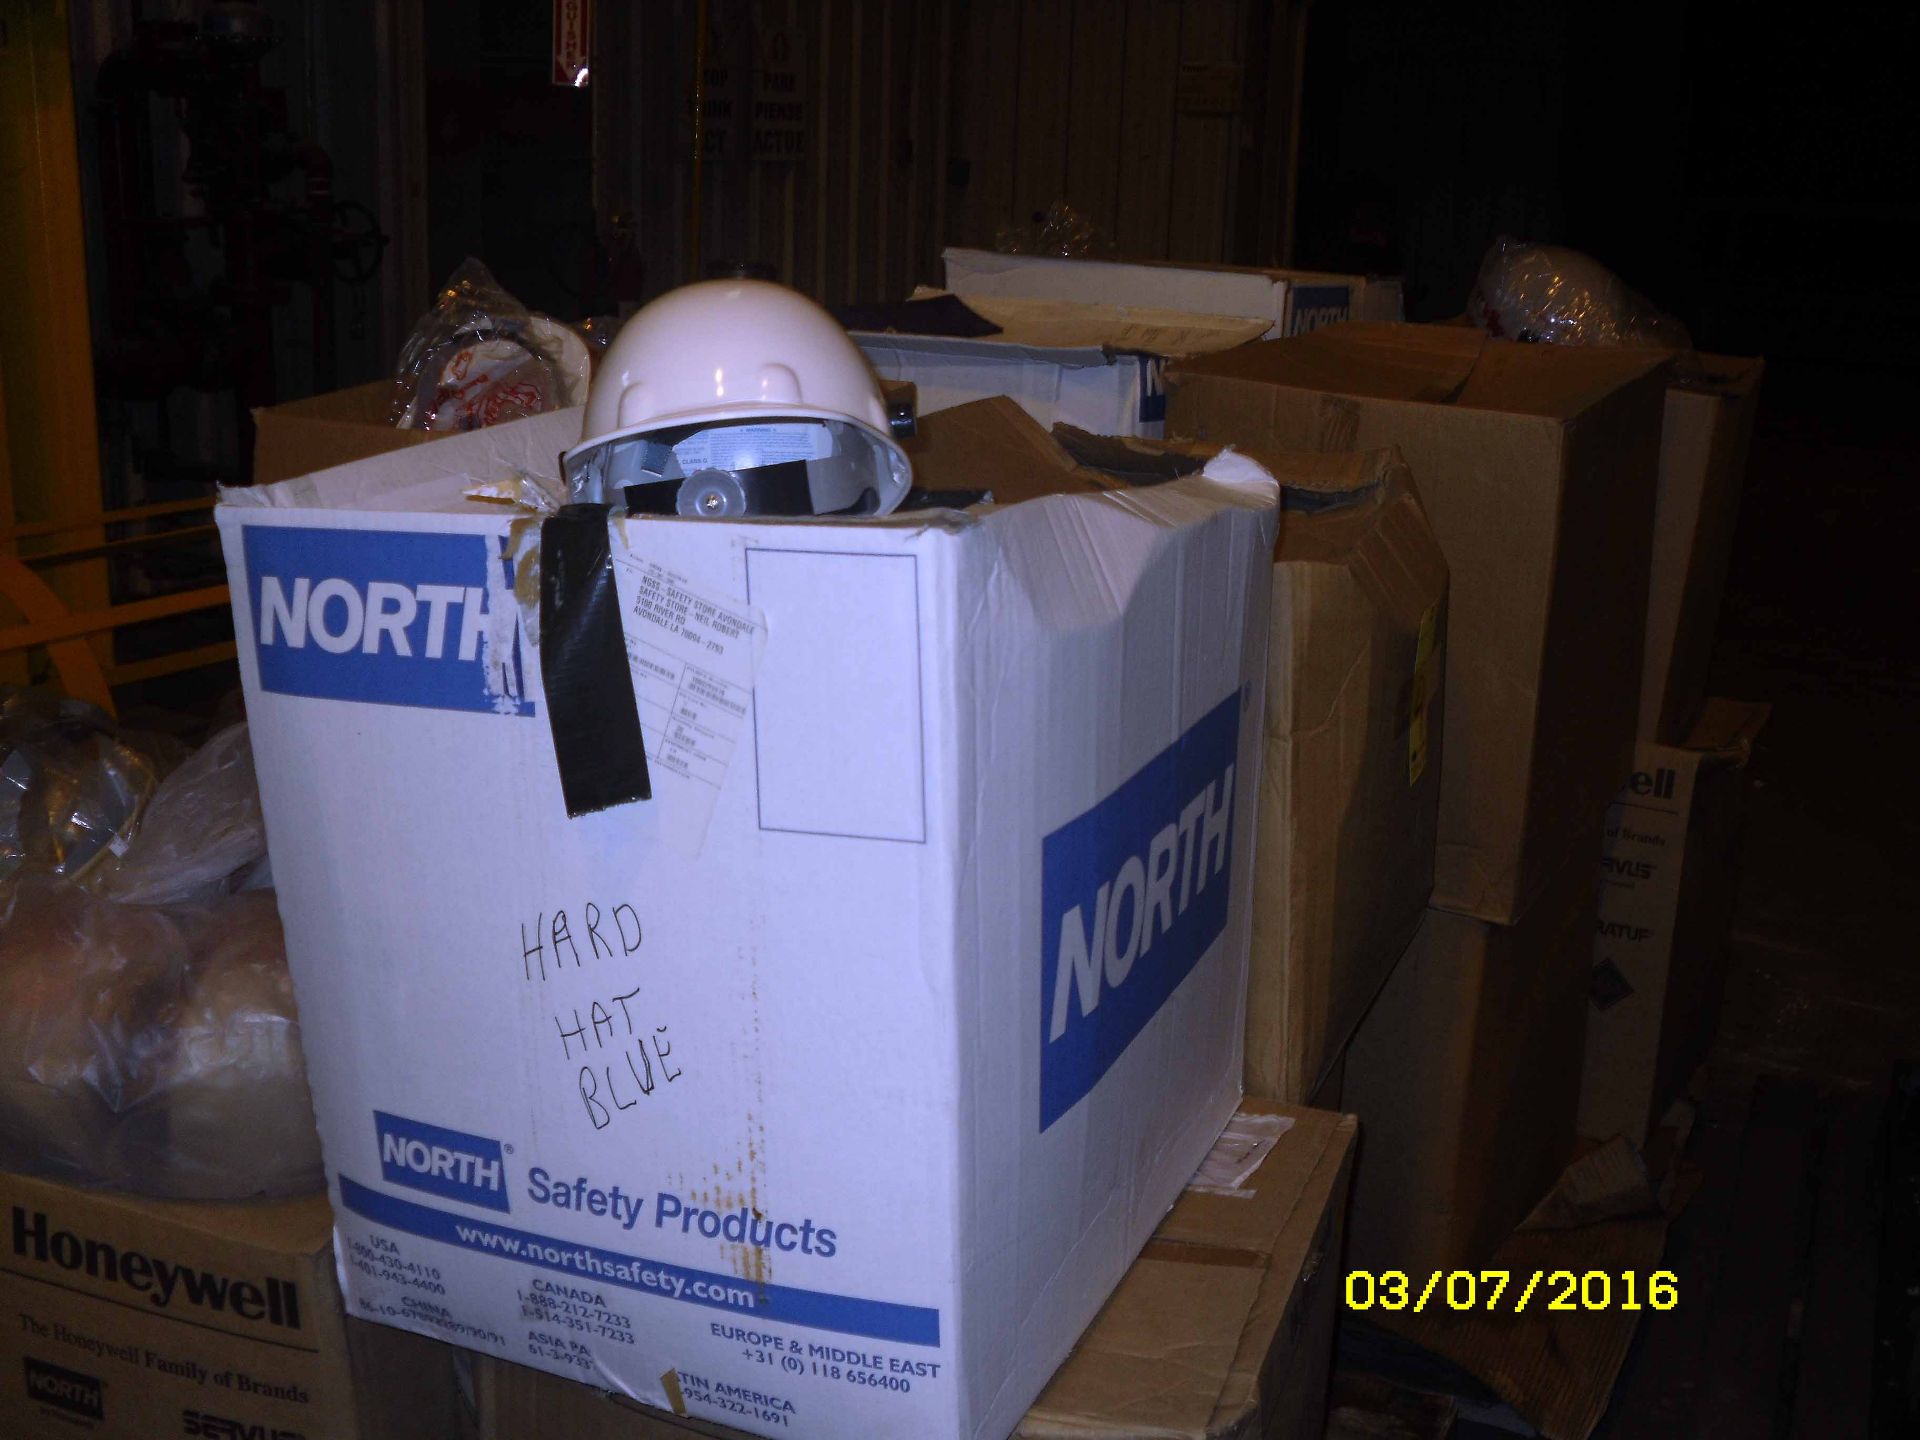 LOT OF HARD HATS, assorted